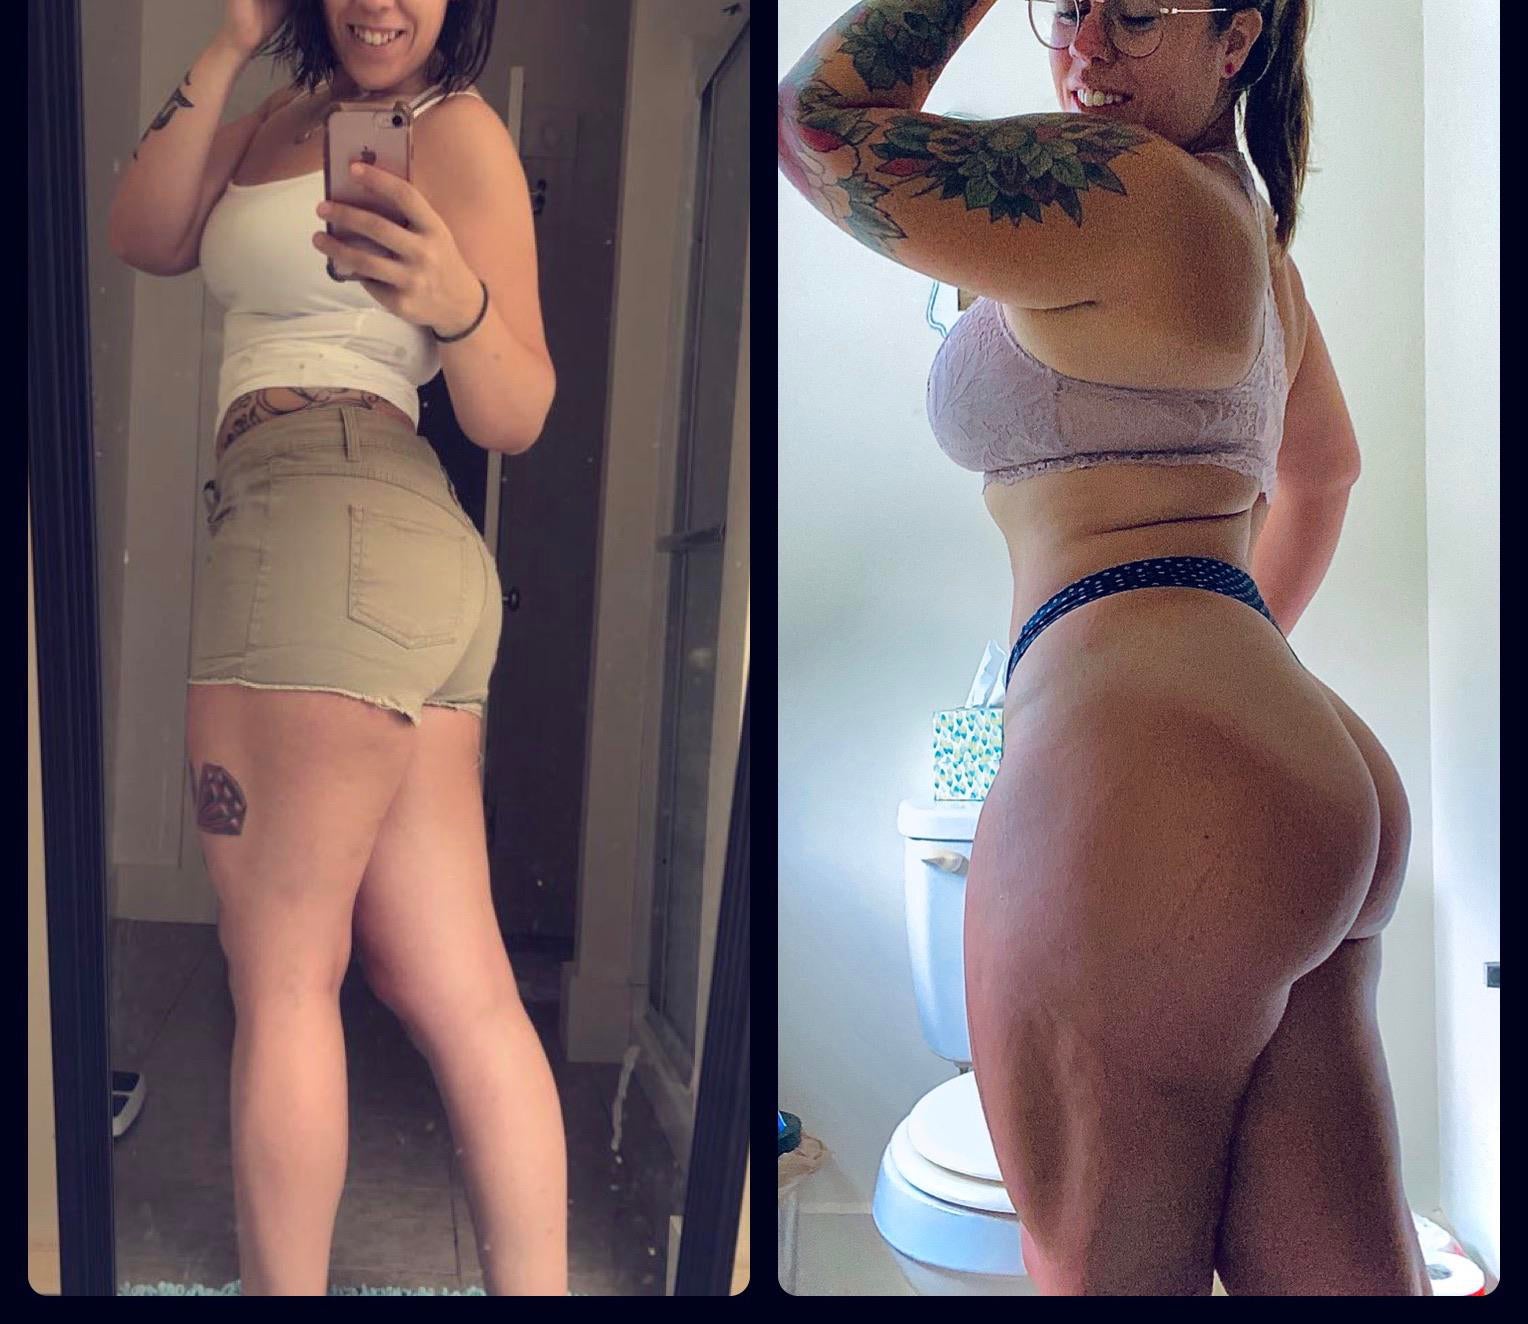 PAWG Do you guys appreciate transformation pictures